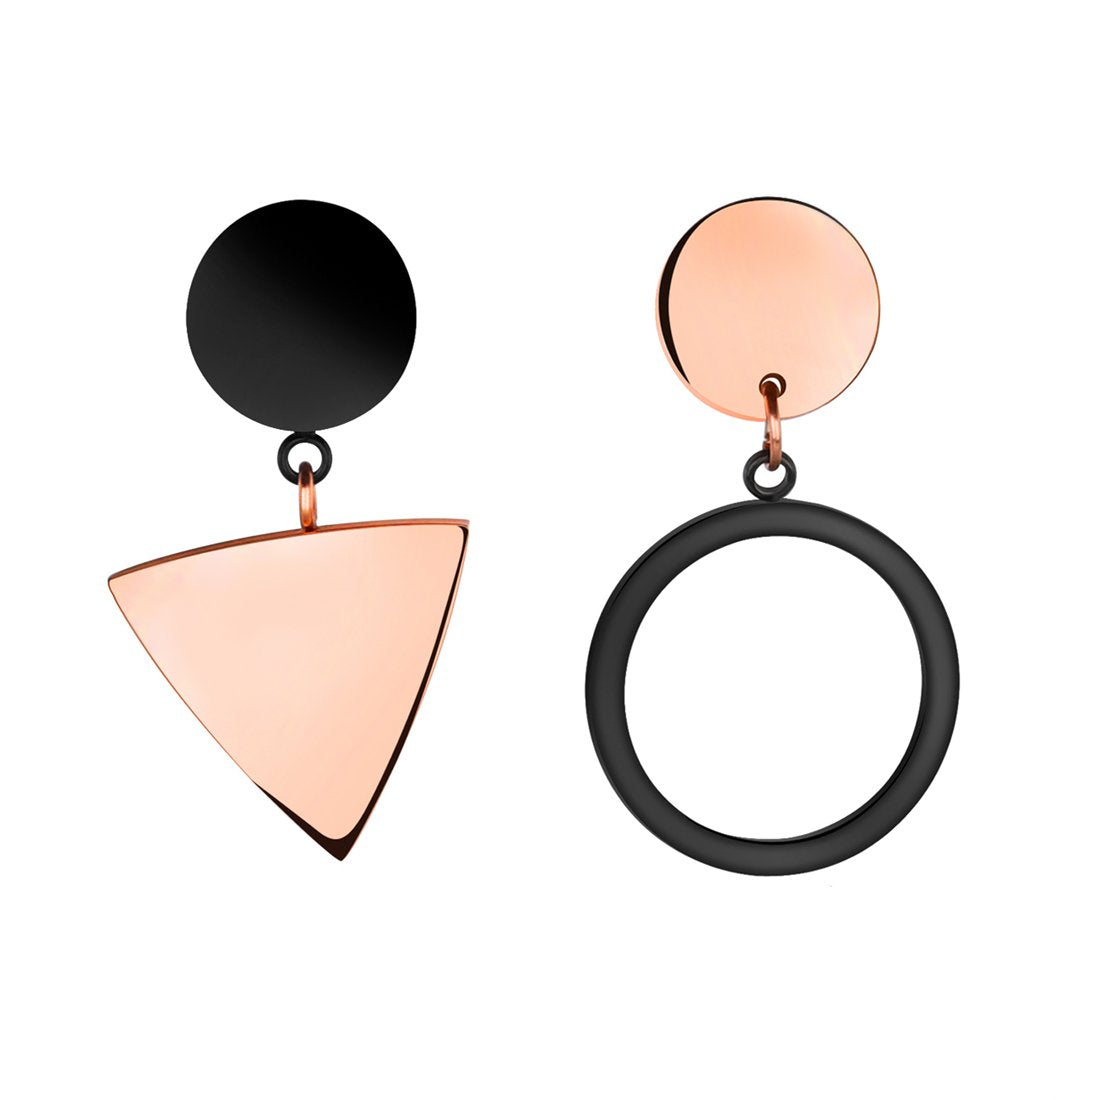 Yellow Chimes Western Style Stainless Steel Never Fading Dual Pattern Designer Earrings for Women & Girls (Rose Gold)